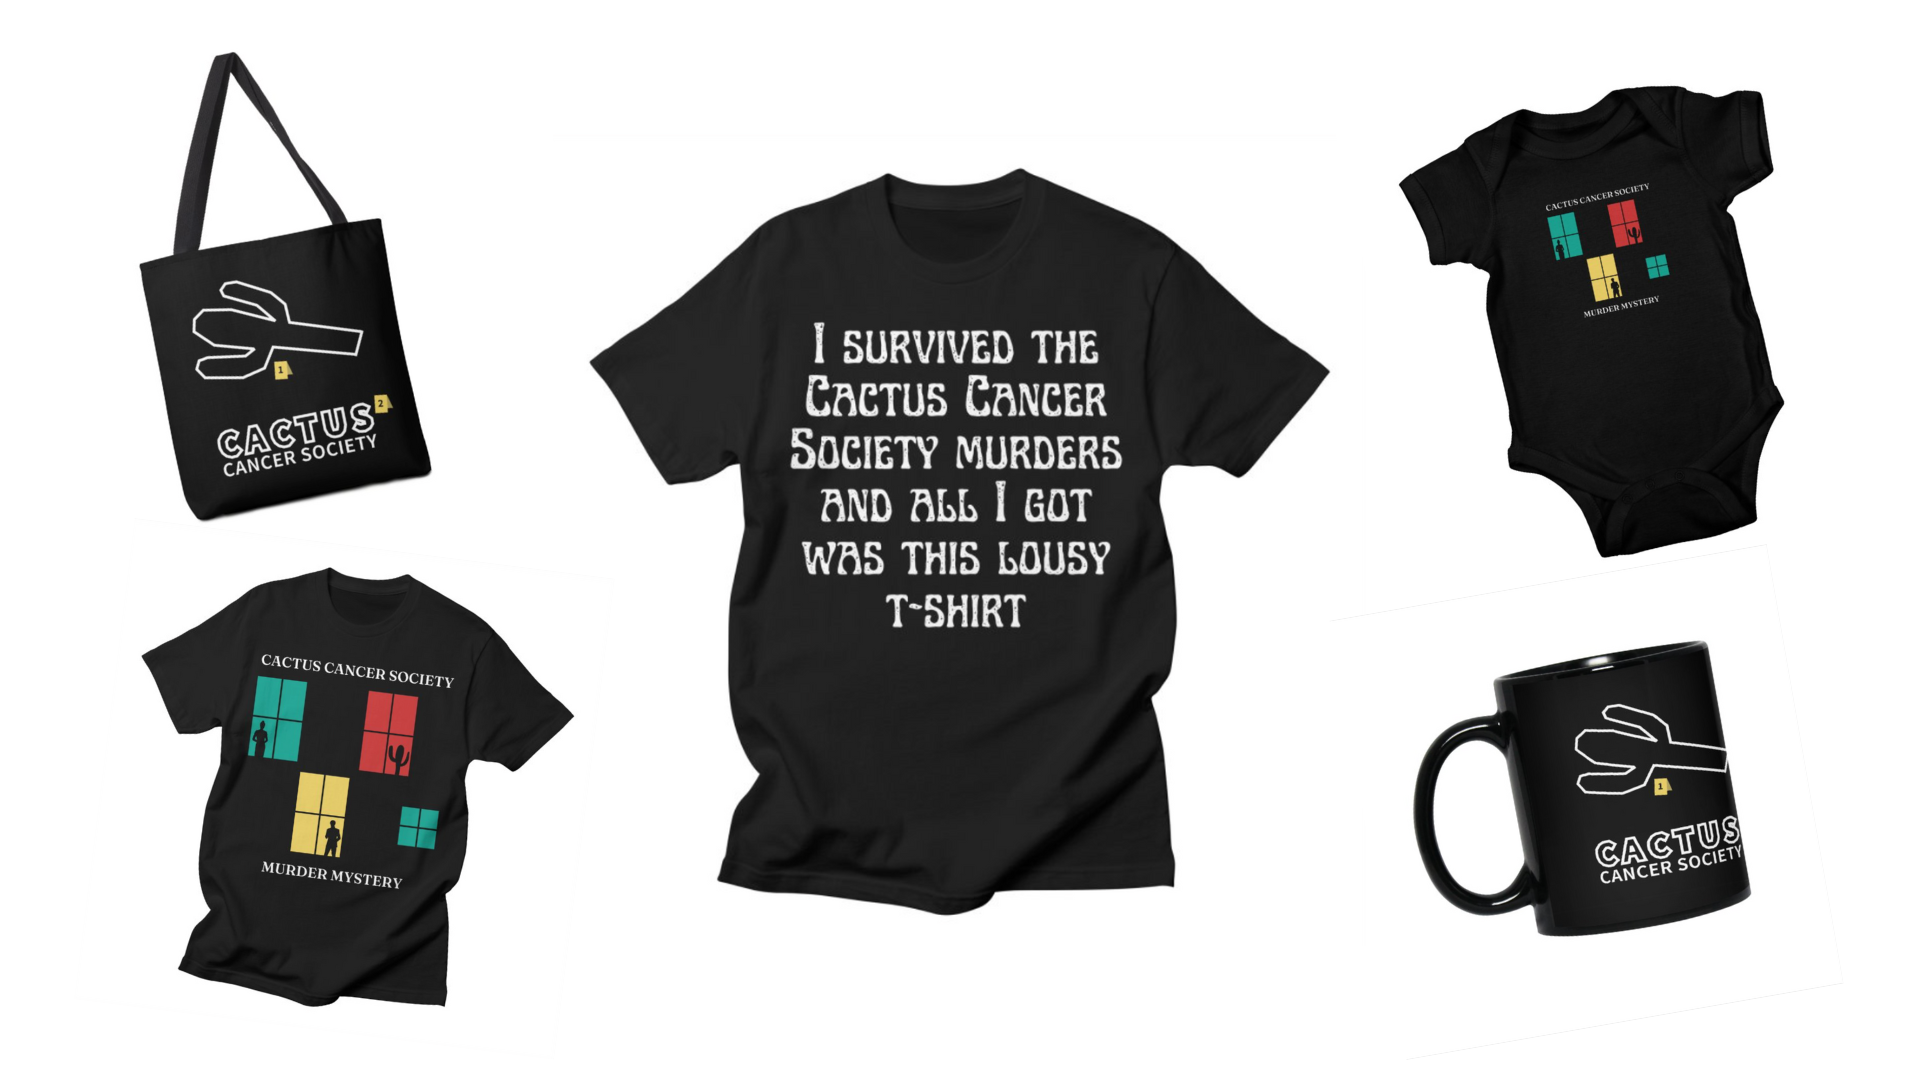 Five black items, a canvas tote, two tshirts, a onesie, and a mug, against a white background. There are three designs: one of a white cactus outline, one of multi-colored window outlines with silhouettes in the window, and the text "I survived the Cactus Cancer Murders and all I got was this lousy t-shirt."